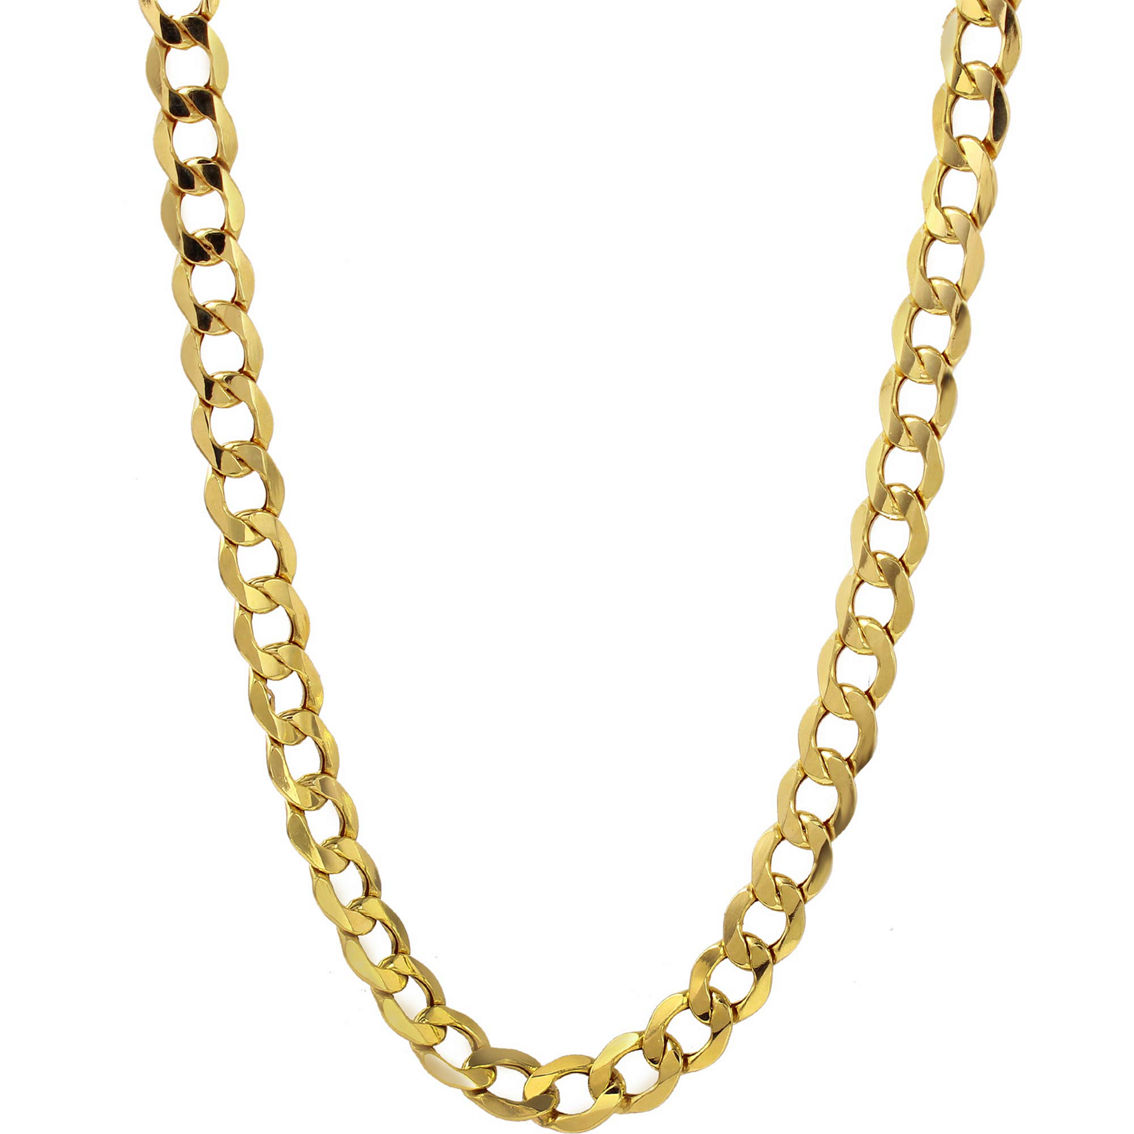 10k Yellow Gold 7mm Curb Link Chain, 24 In. | Chains & Pendants ...